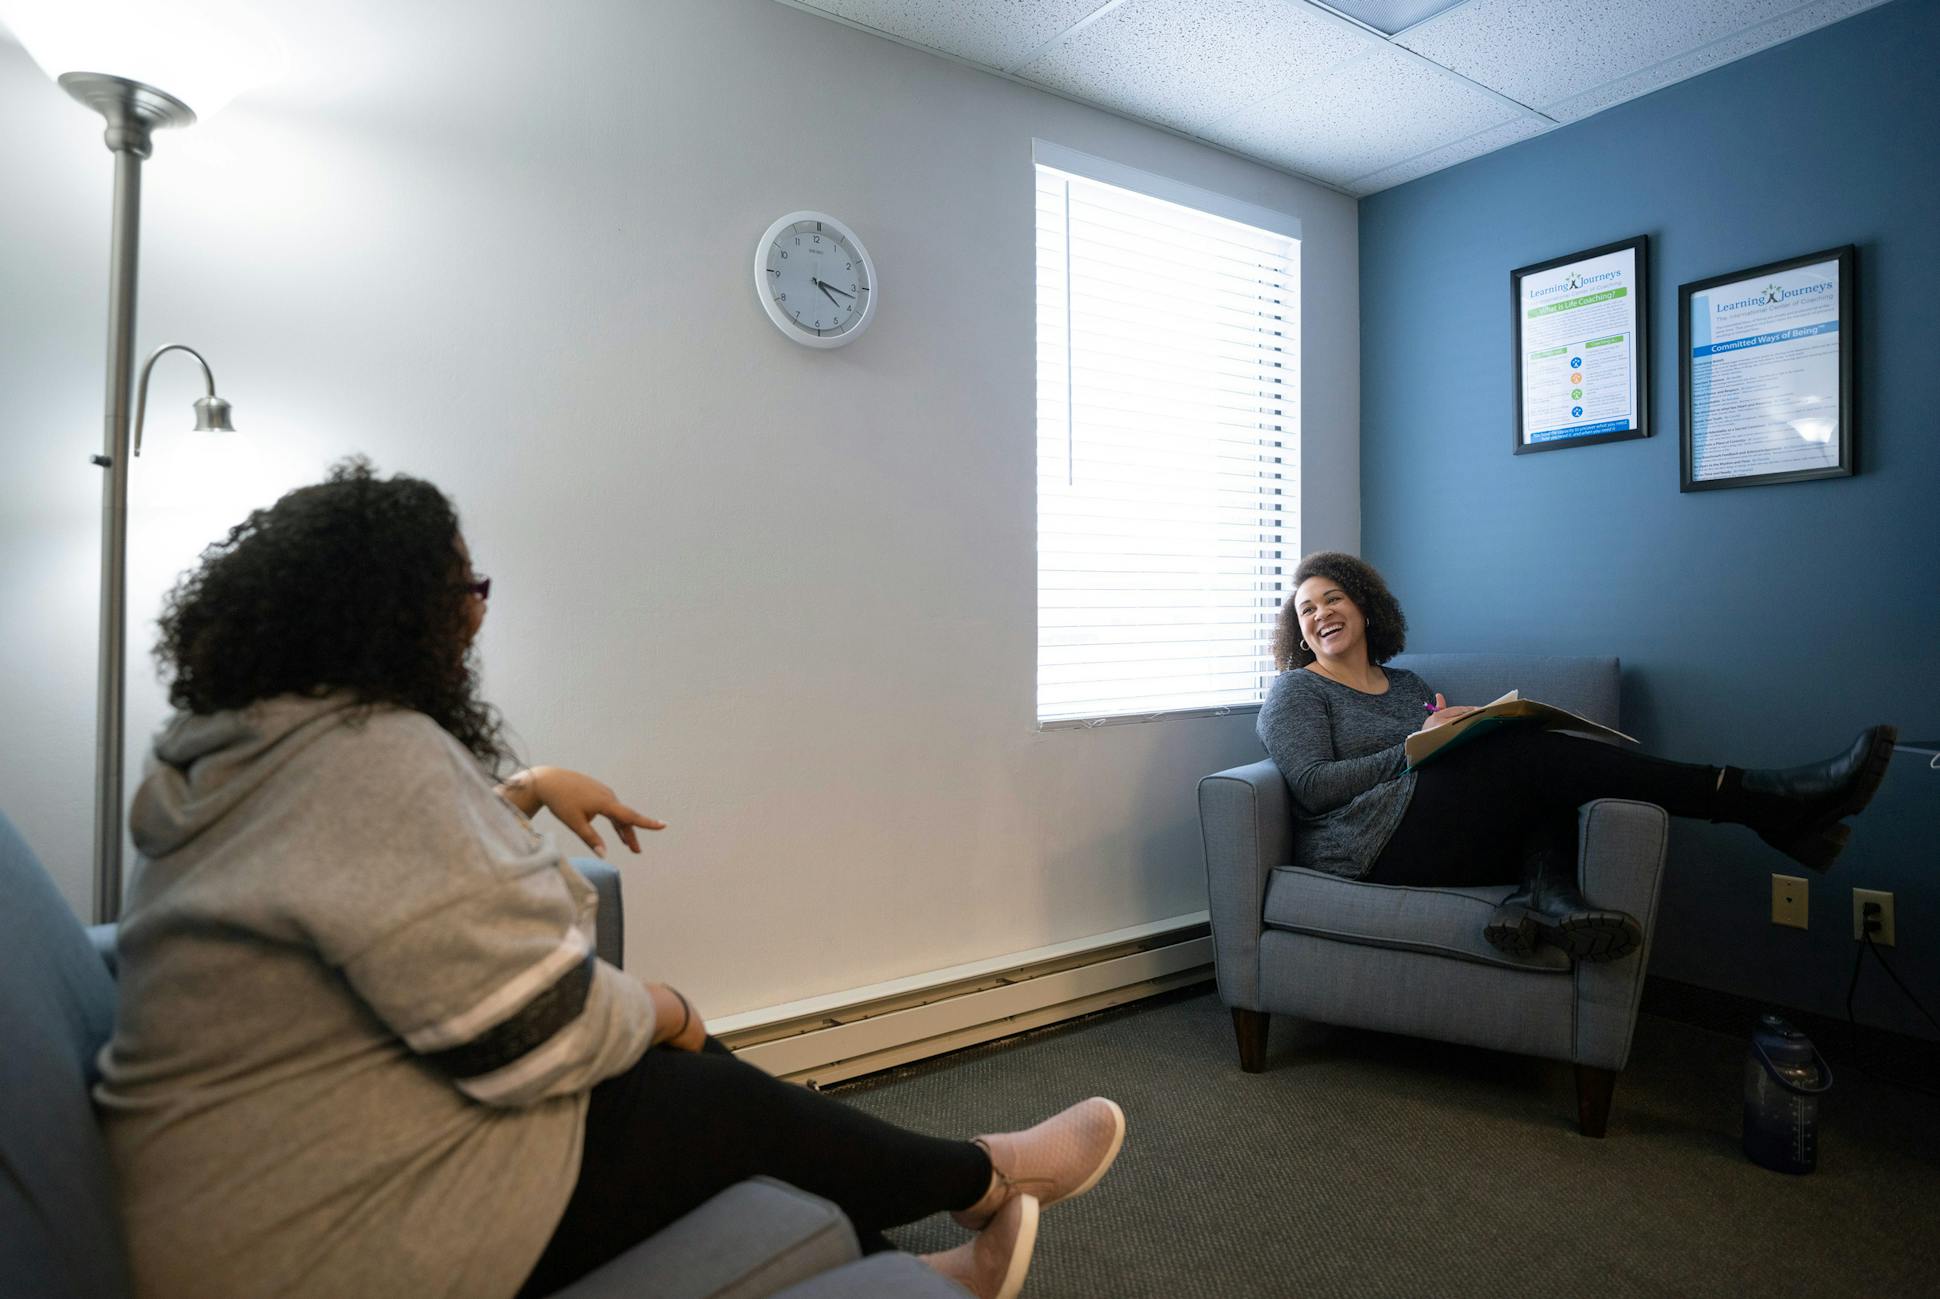 Resa Clarke, left, has monthly life-coaching sessions with Lynesha Caron at Pregnancy Choices in Apple Valley. She calls the center's support “life-saving.”